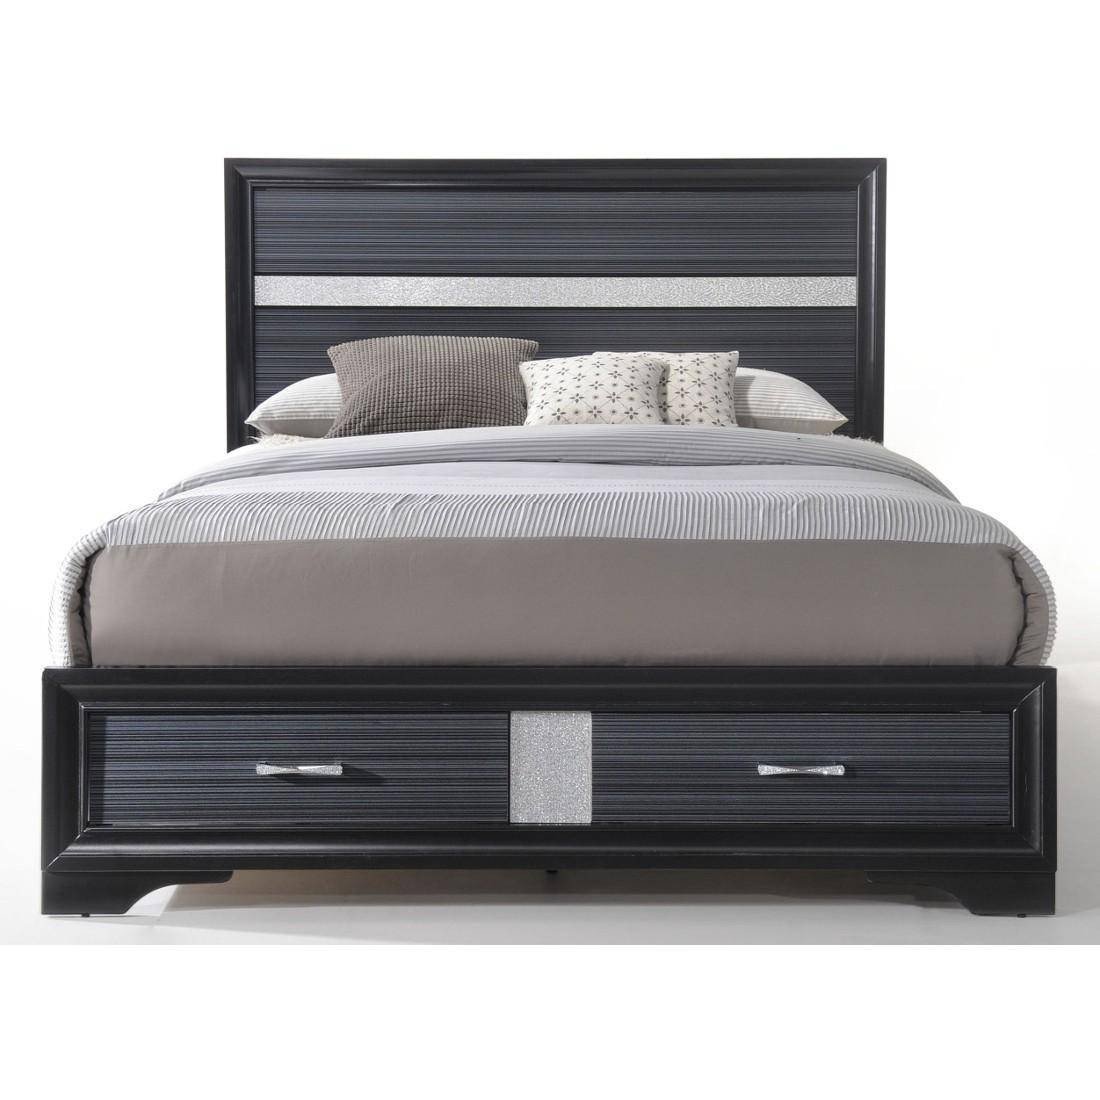 Black White and Gray Bedroom Best Of Black Wood Queen Storage Bedroom Set 4pcs Naima Q Acme